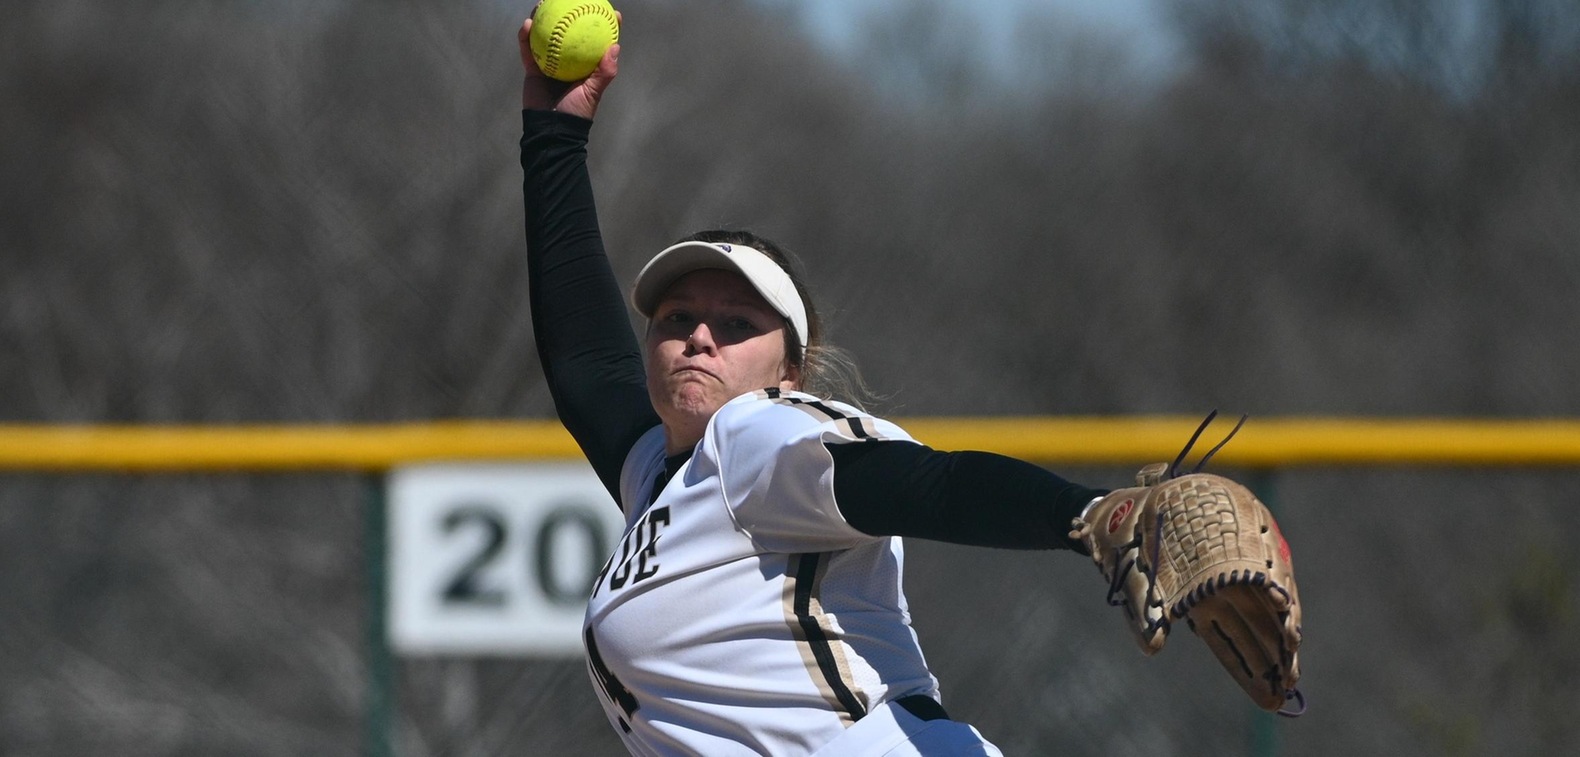 Katie Cunningham tossed a two-hit shutout in the opener.